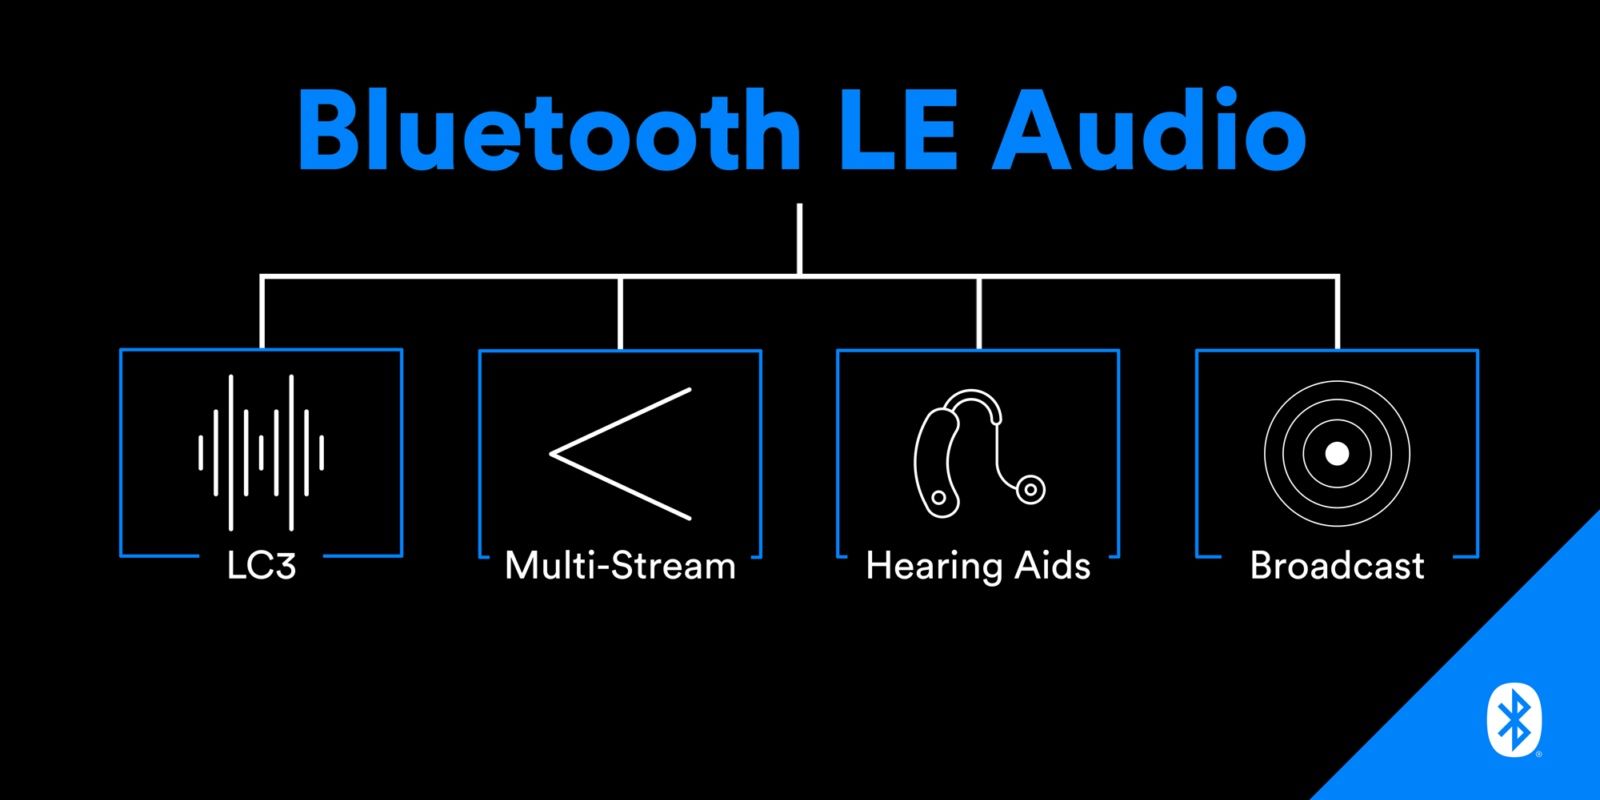 What Features Bluetooths New Upgrade Will Bring